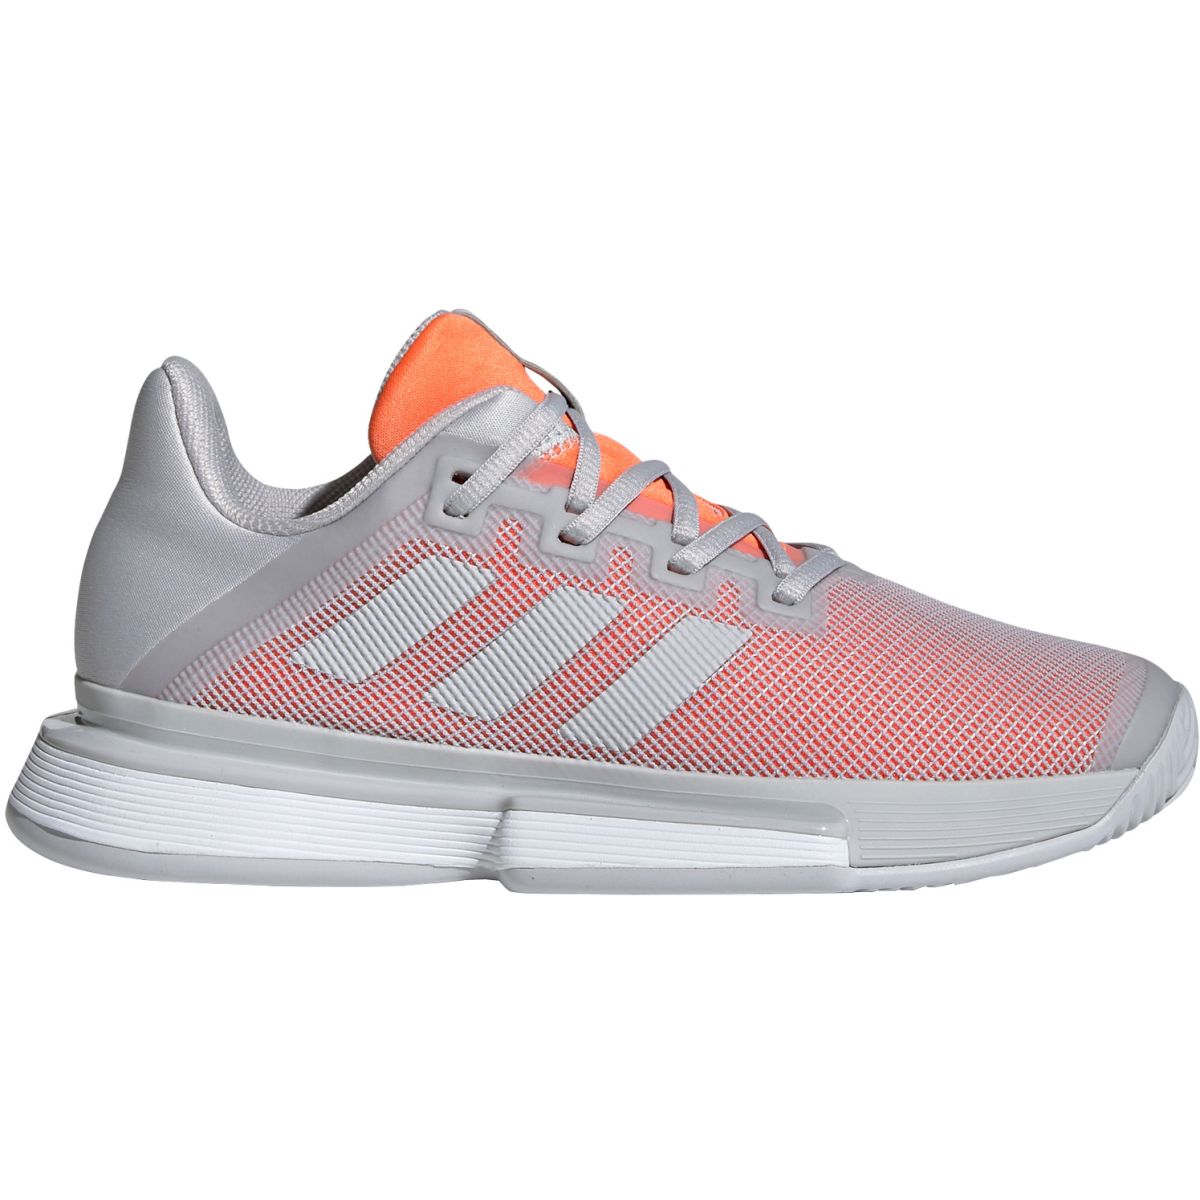 adidas SoleMatch Bounce Clay Women's Tennis Shoes EF4461